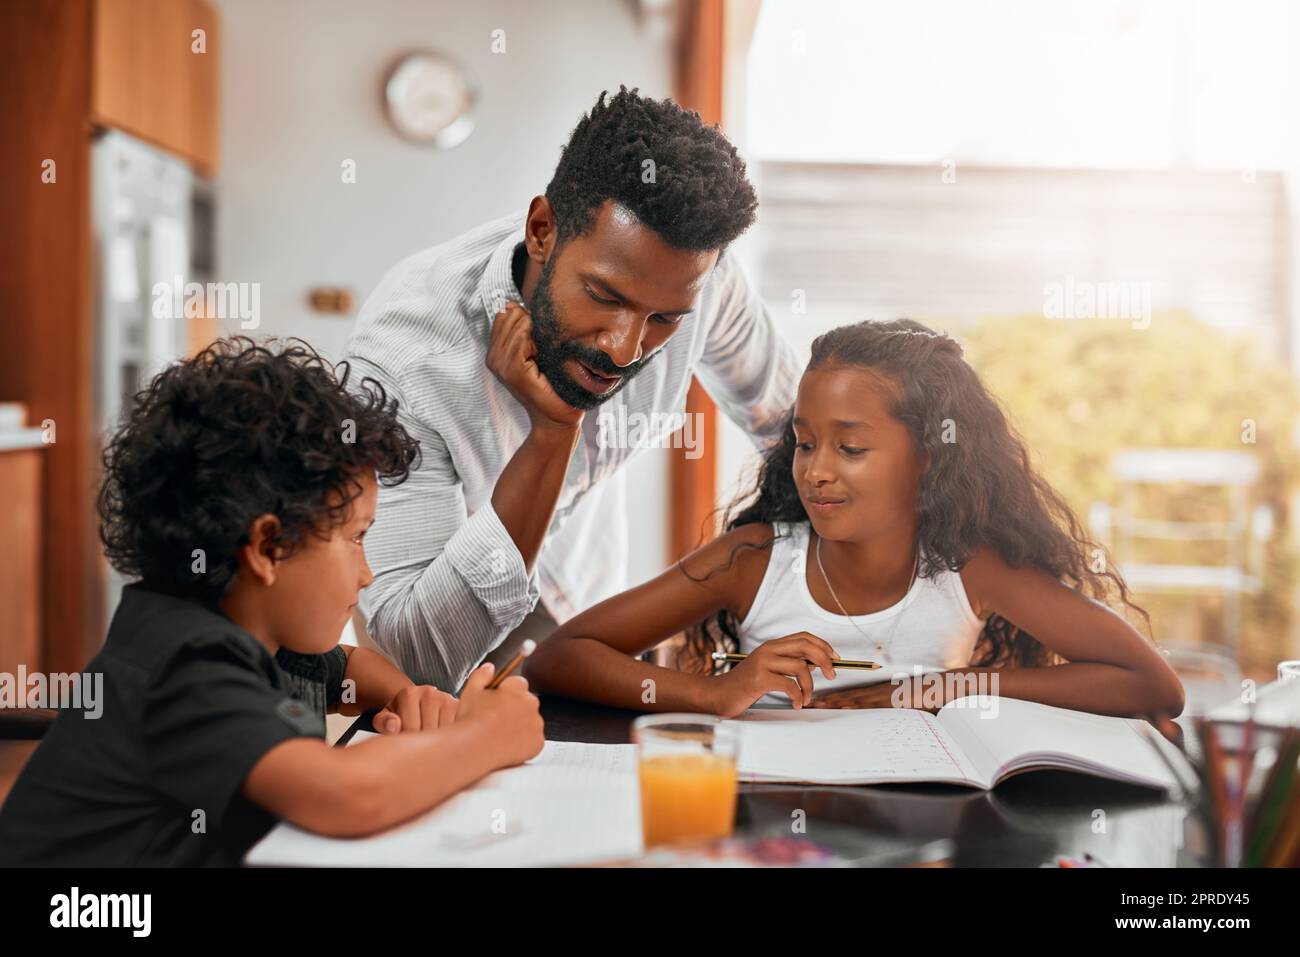 Its homework hour. a dad helping his children with their homework. Stock Photo